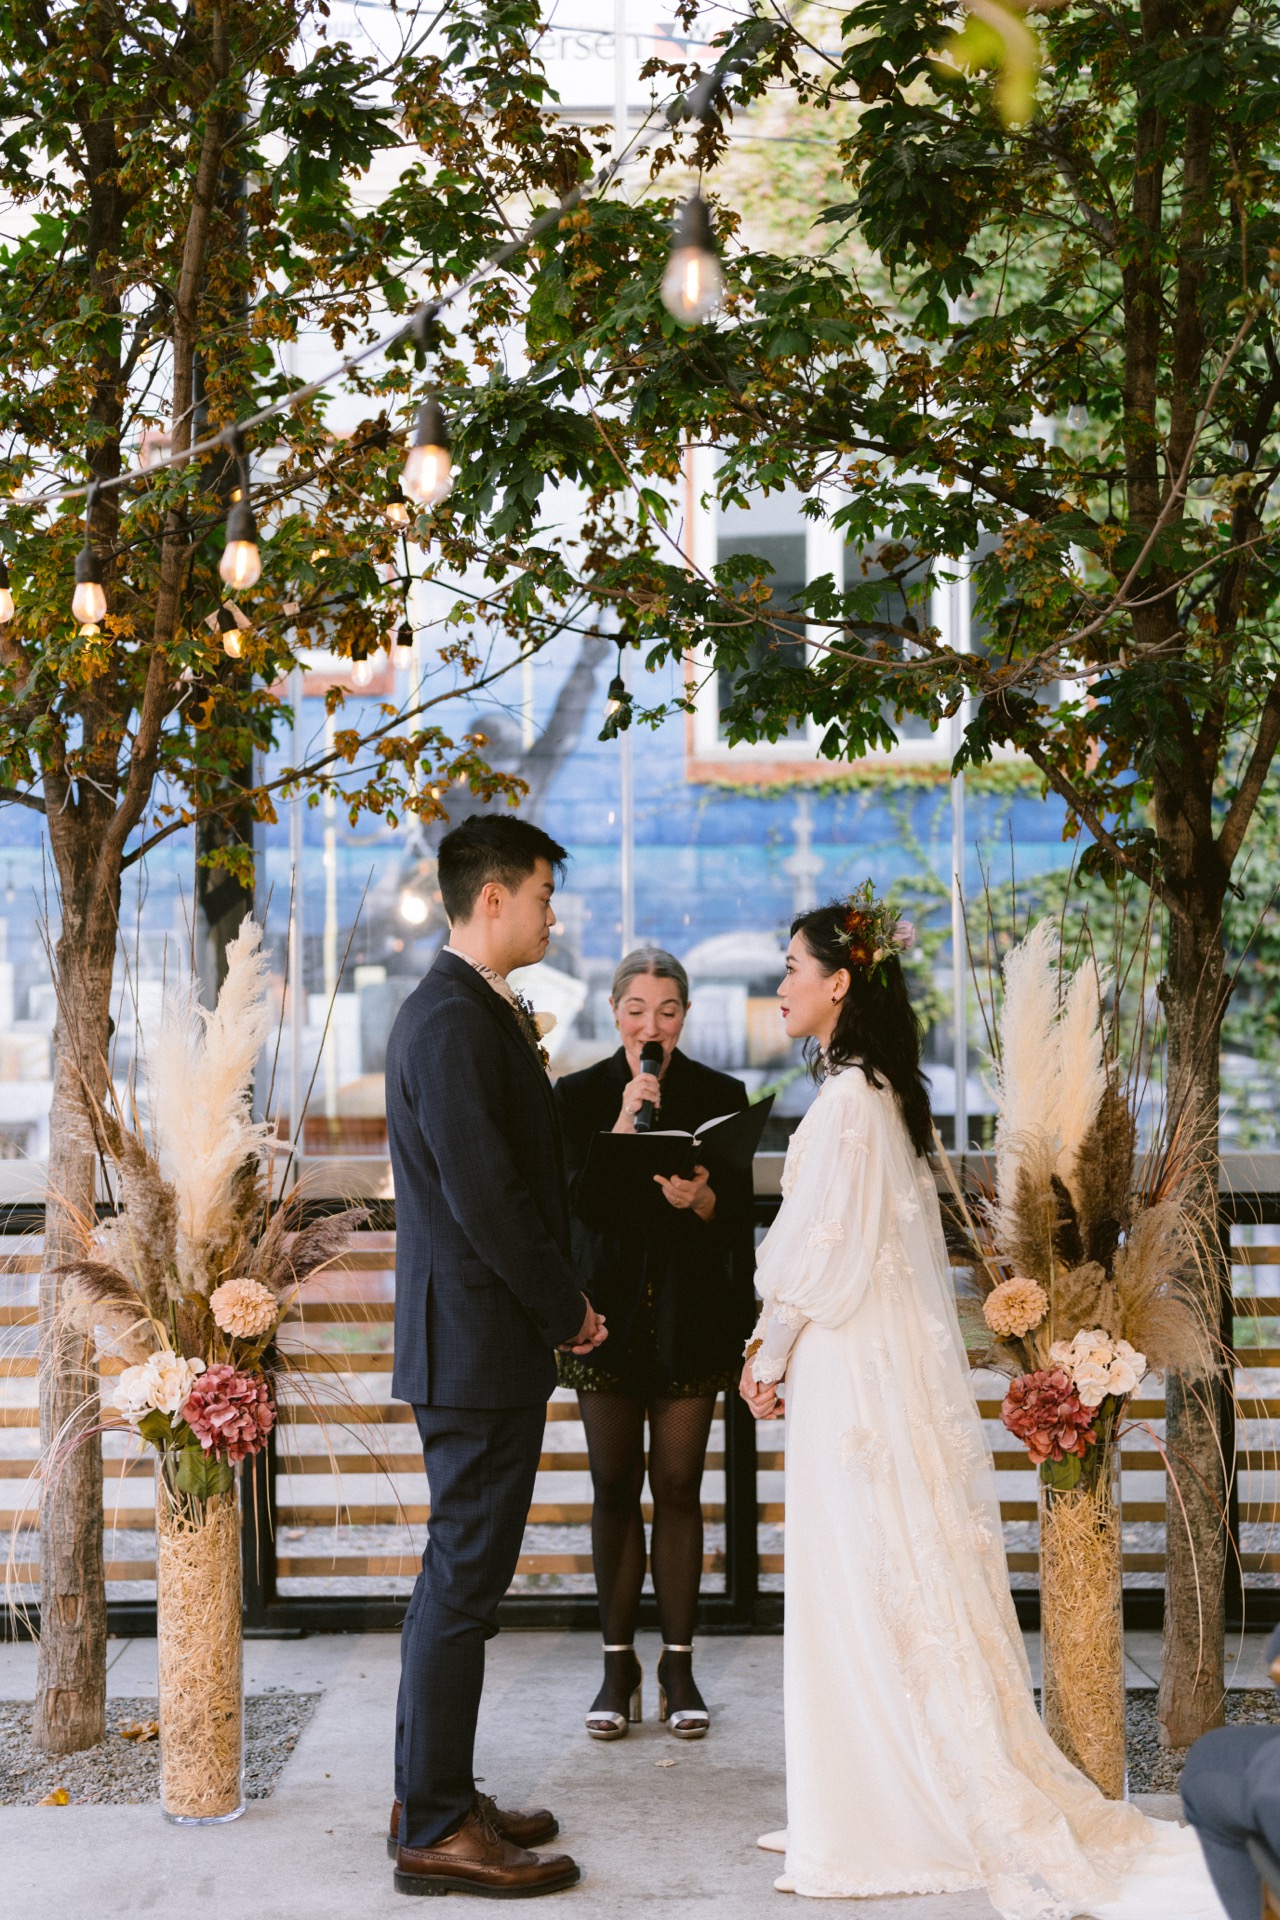 A couple exchanges wedding vows outdoors with an officiant presiding over the ceremony, surrounded by greenery and floral decorations